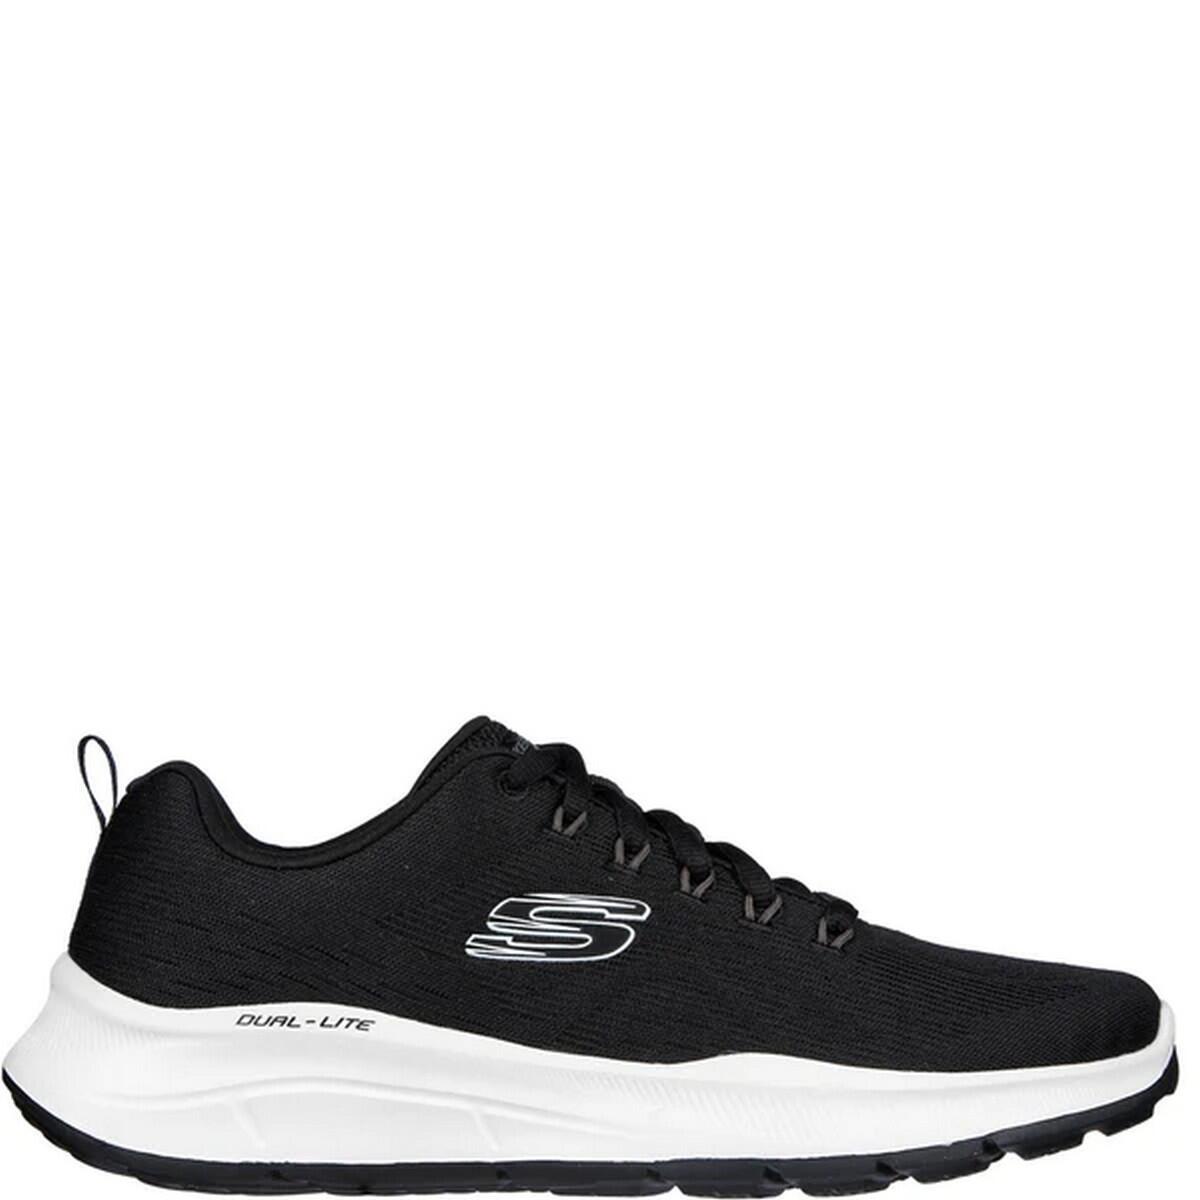 Mens Equalizer 5.0 Trainers (Black/White) 3/5